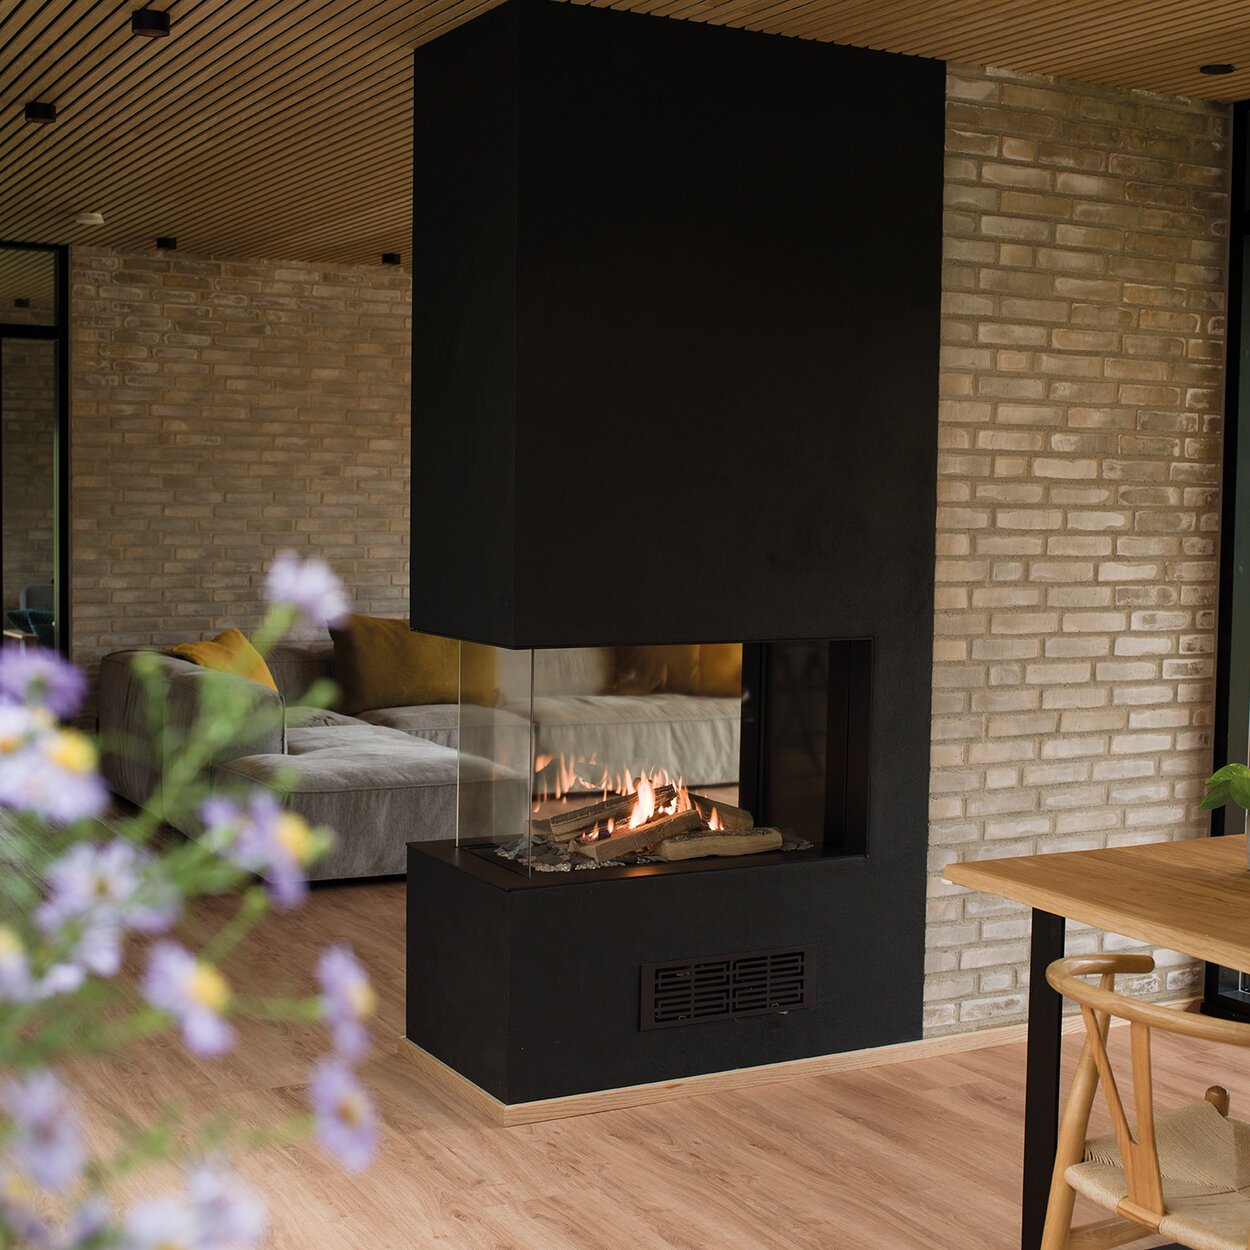 VISIO 70 RD gas fireplace stands as a room divider in a black partition, structuring the elegant living room with wooden floor between the living room and dining table